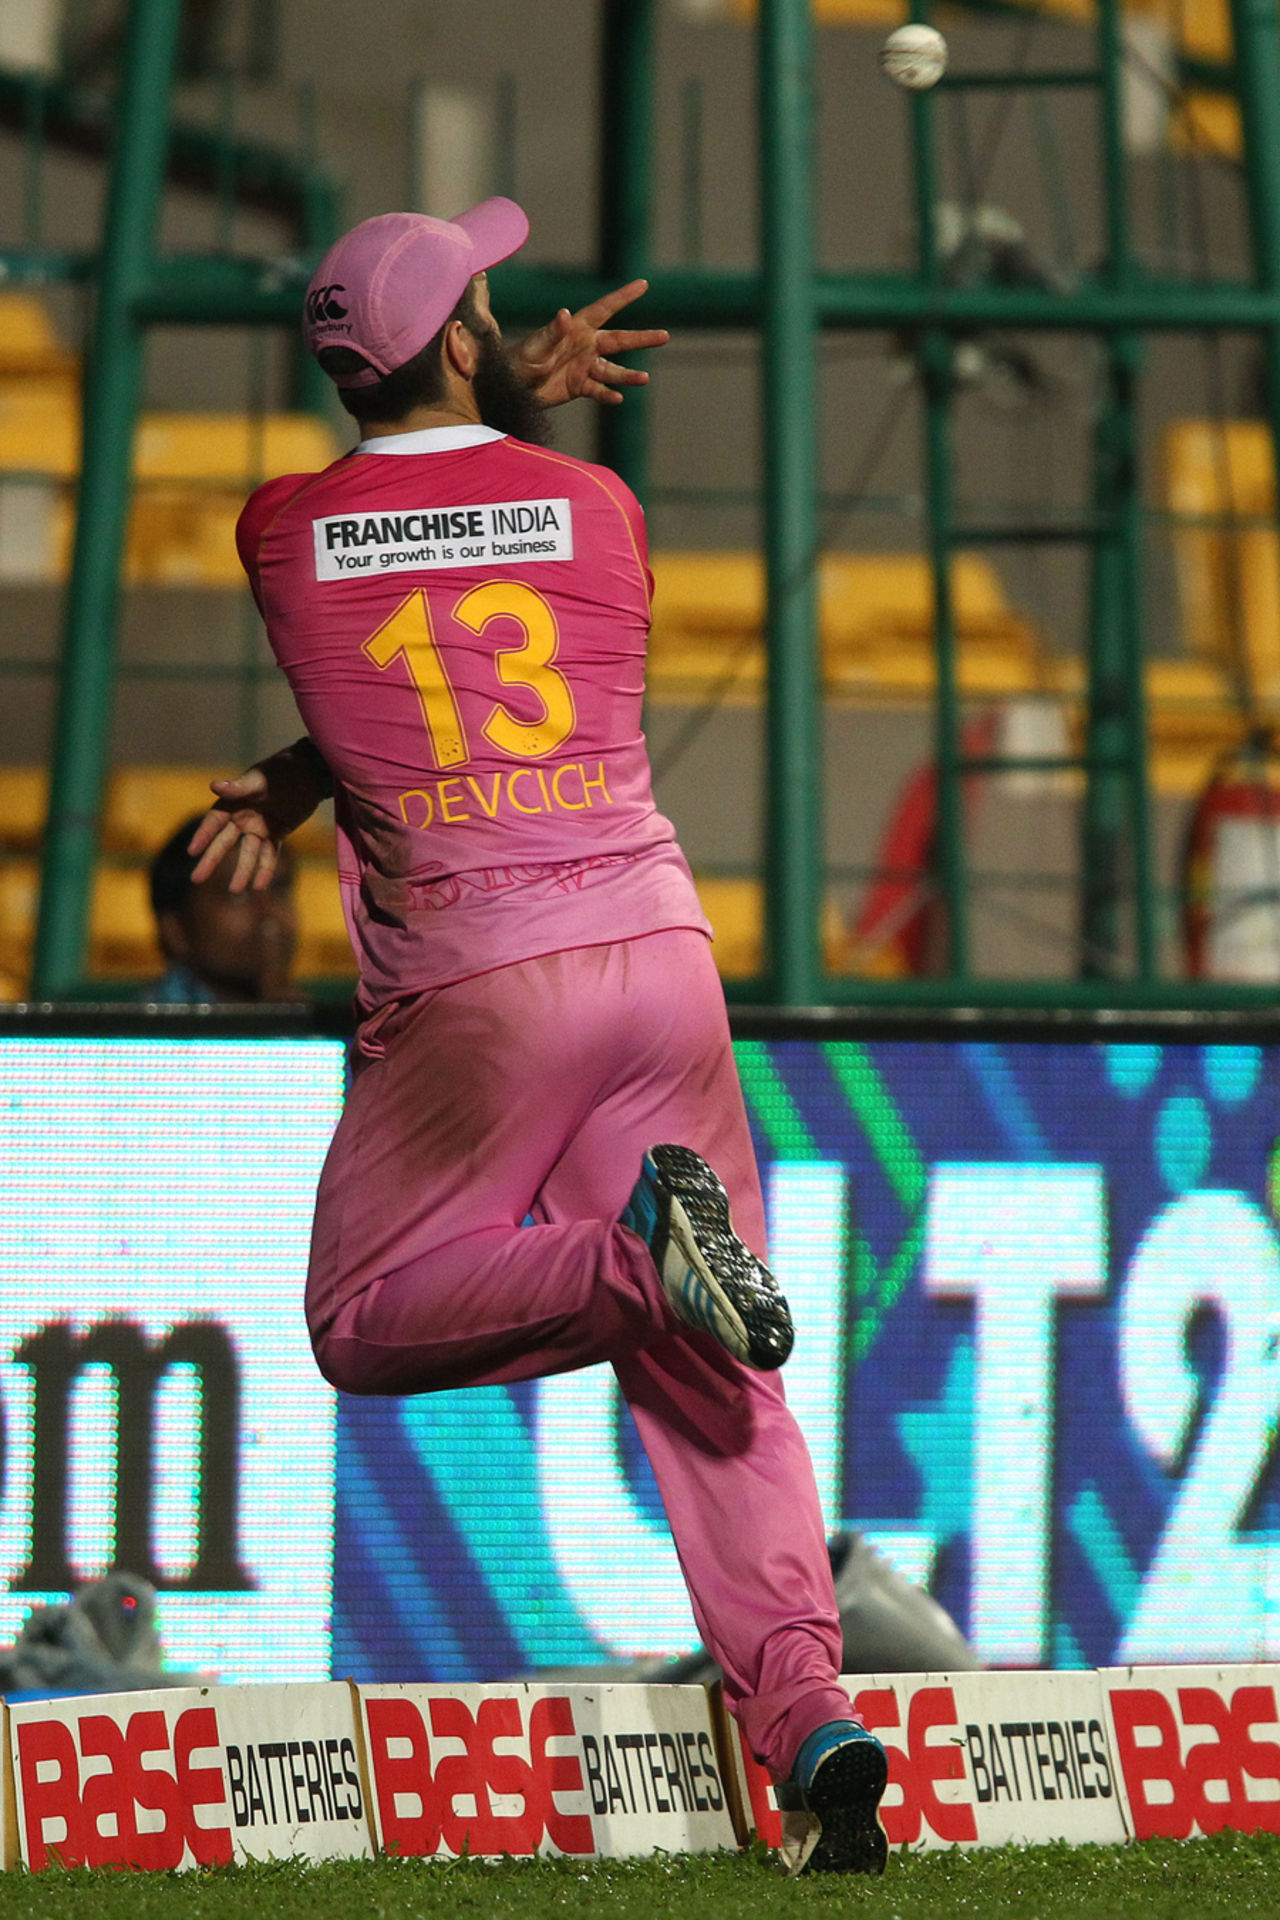 Anton Devcich throws the ball back to Daryl Mitchell in a relay catch, Barbados Tridents v Northern Districts, Champions League T20, Group B, Bangalore, September 30, 2014